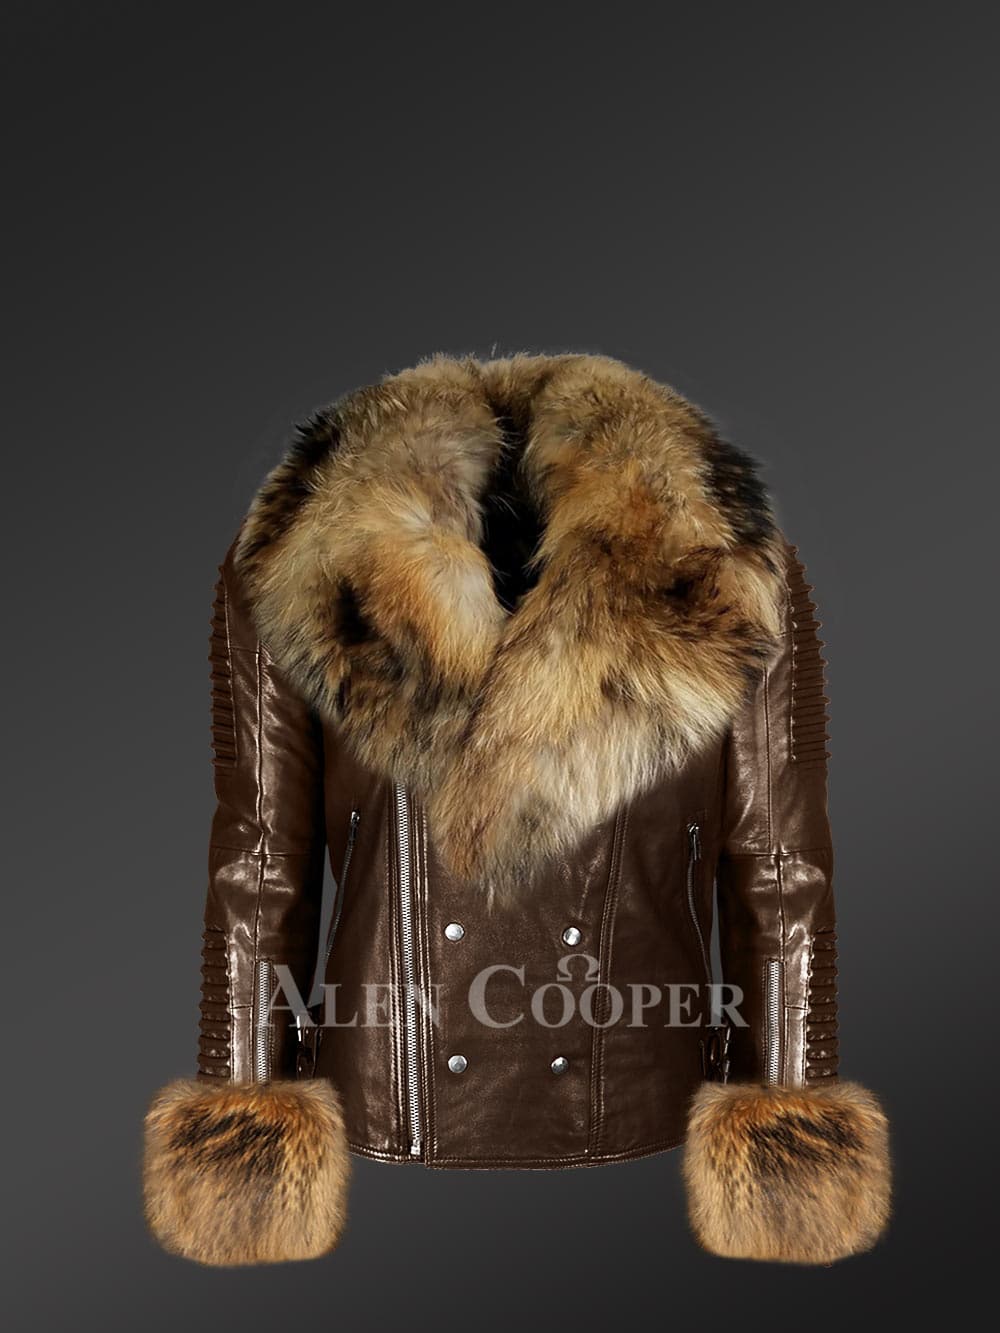 Genuine Leather Jacket For Men With Raccoon Fur Collar And Handcuffs